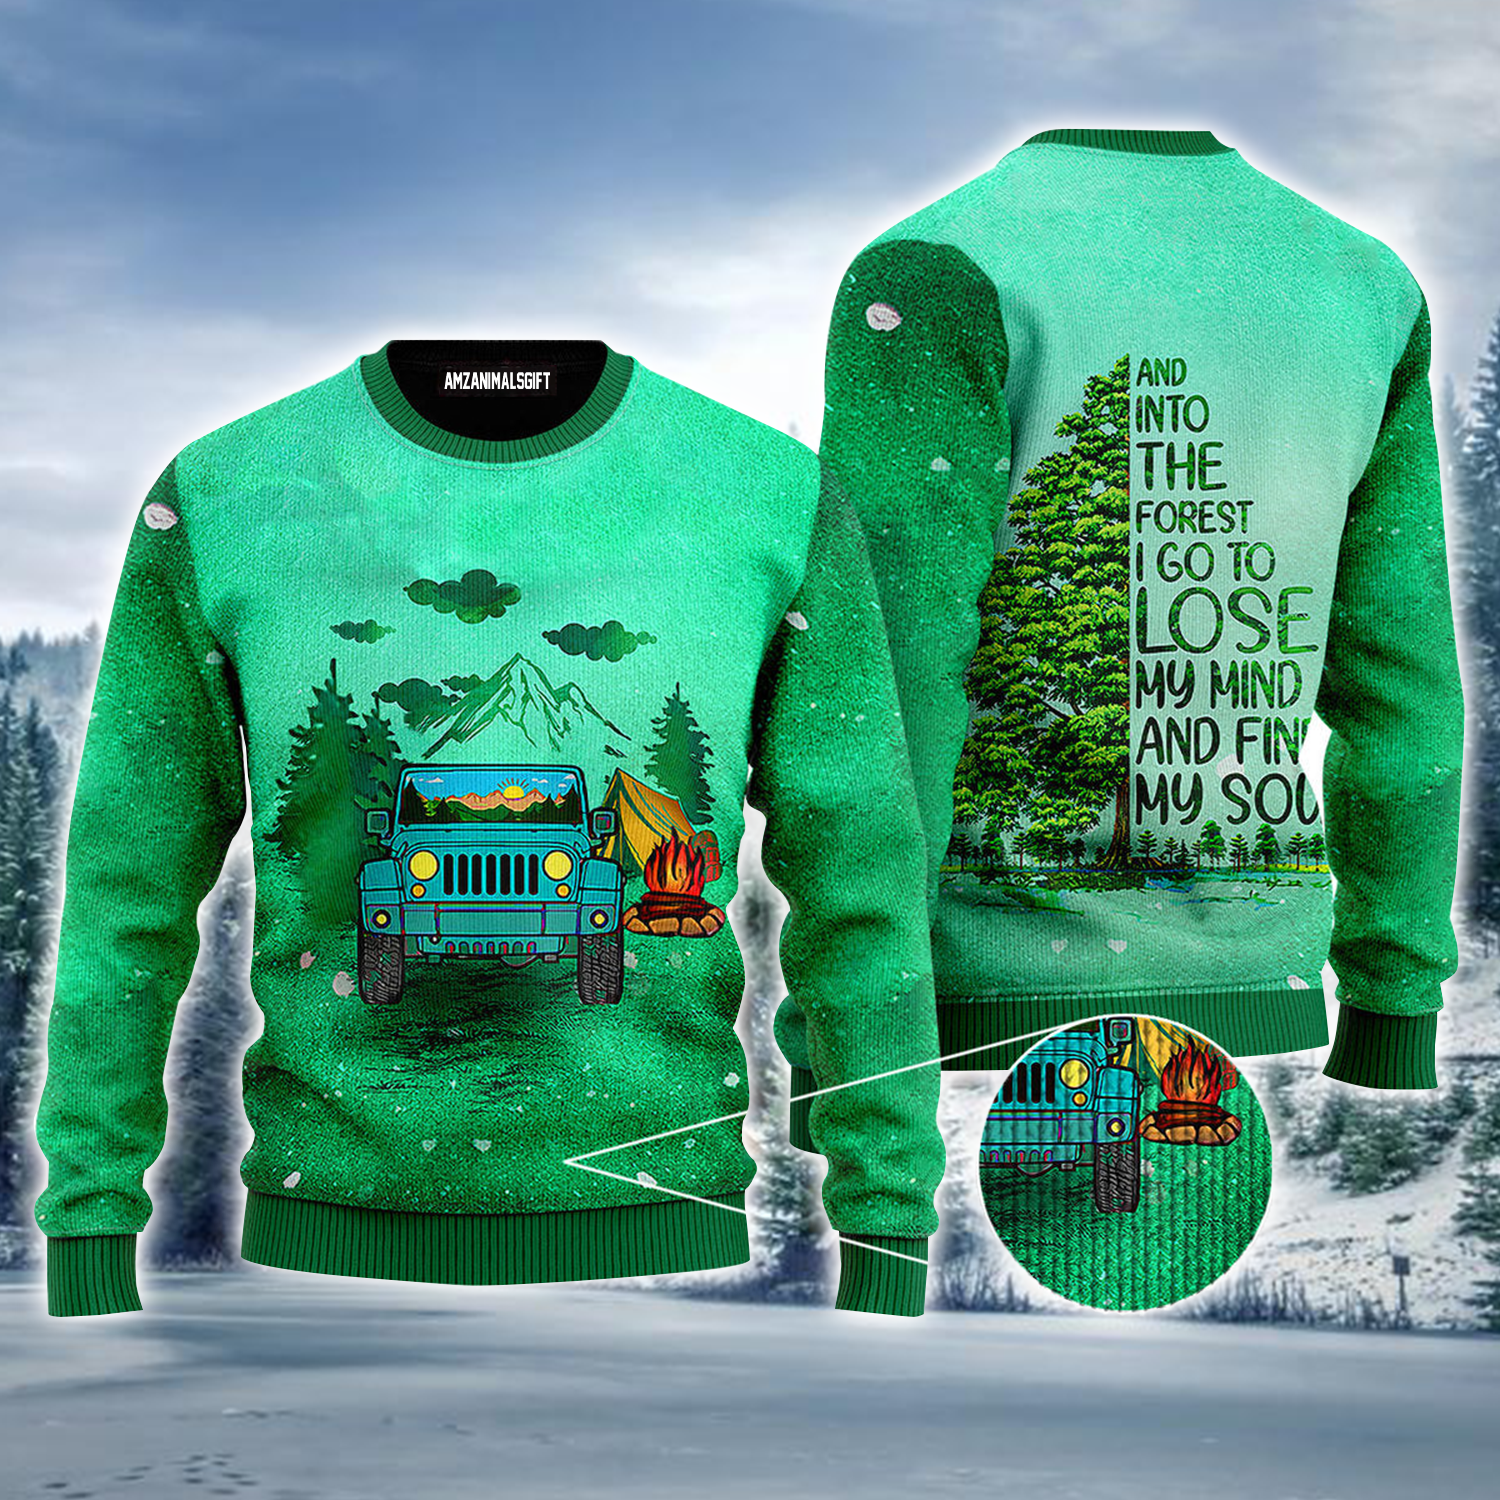 Travelling Ugly Sweater, And Into The Forest I Go To Lose My Mind And Find My Soul Blue Ugly Sweater For Men & Women, Perfect Gift For Friends, Family